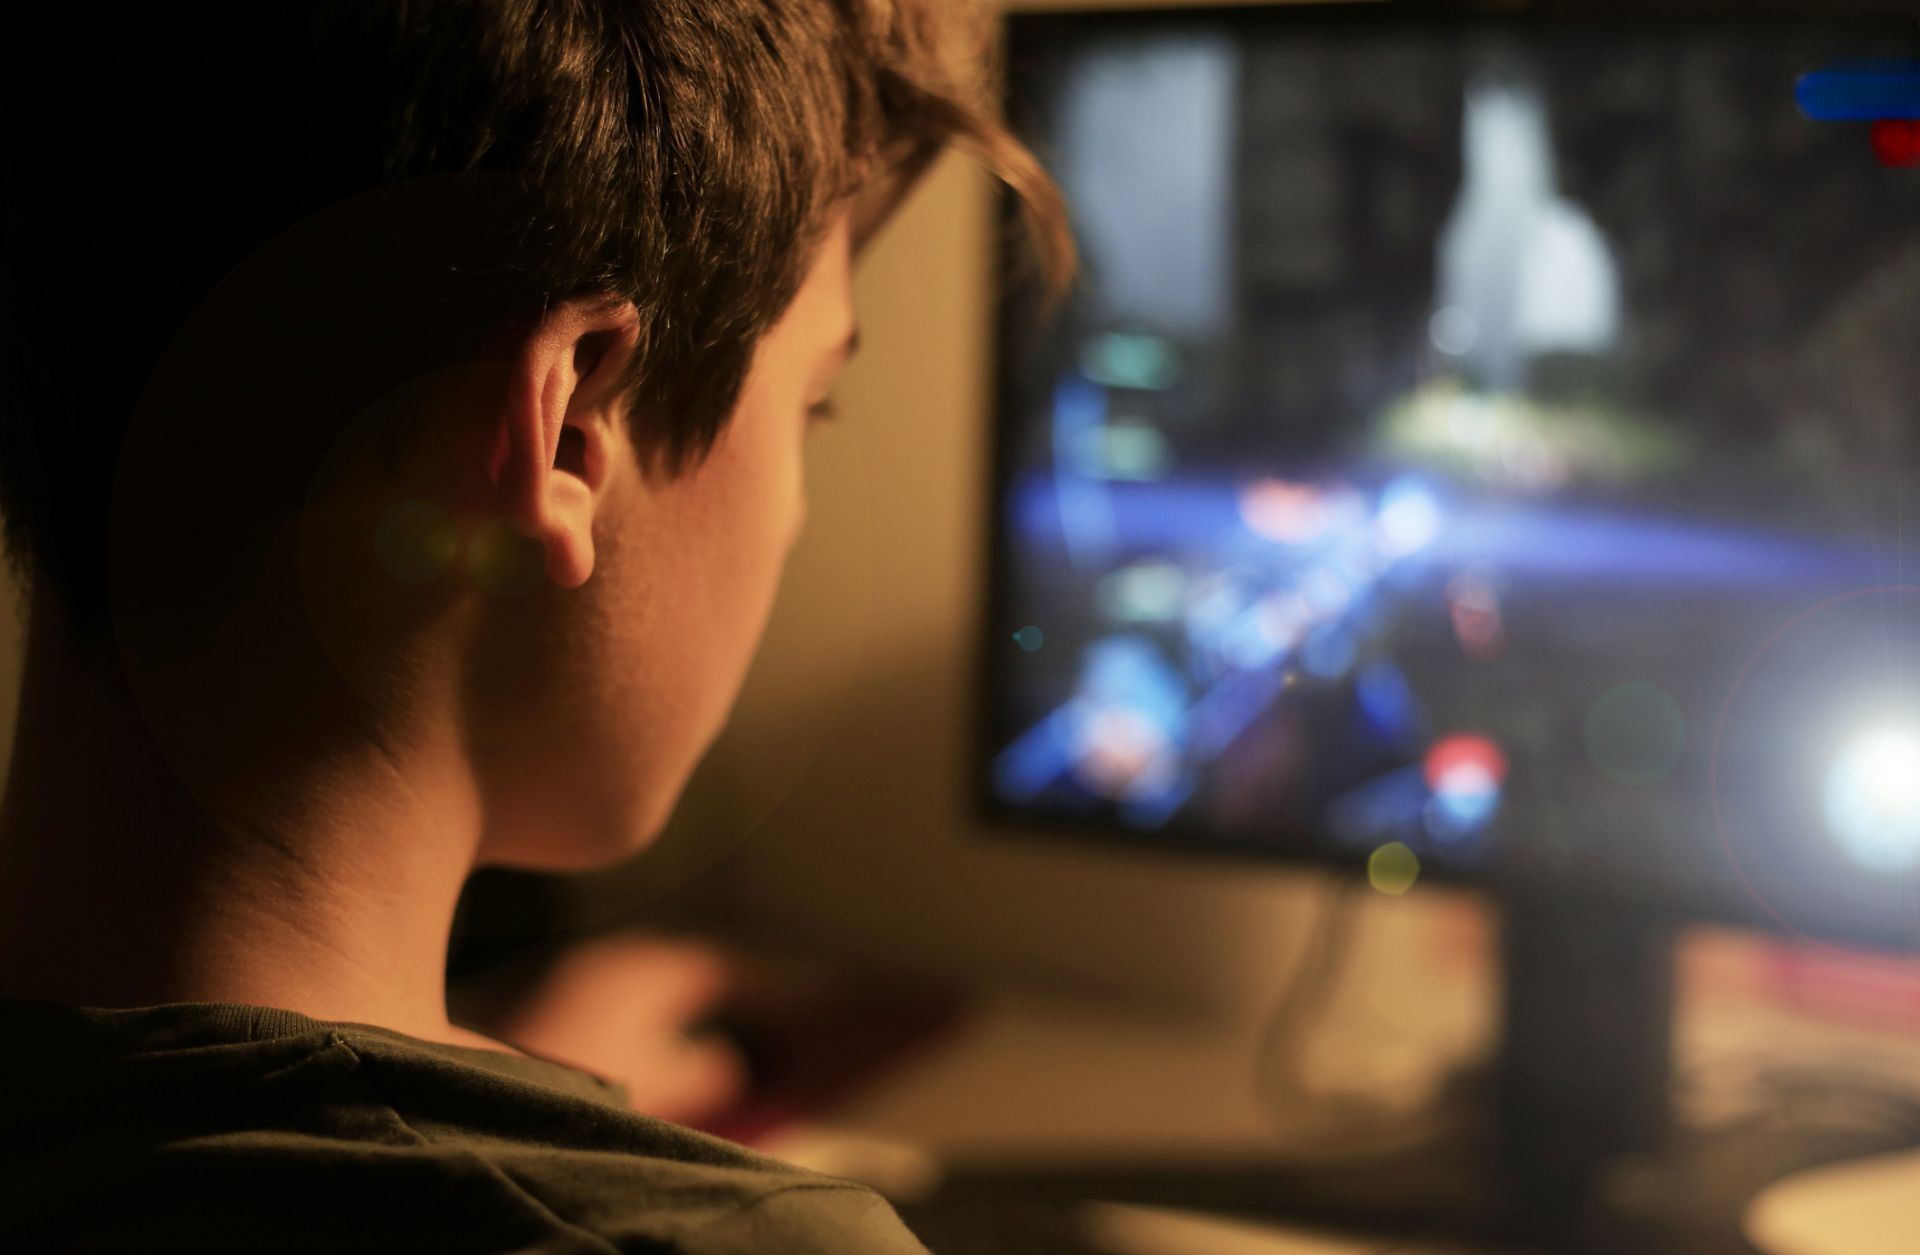 Digital games have exploded in popularity, and militaries around the world have taken notice.